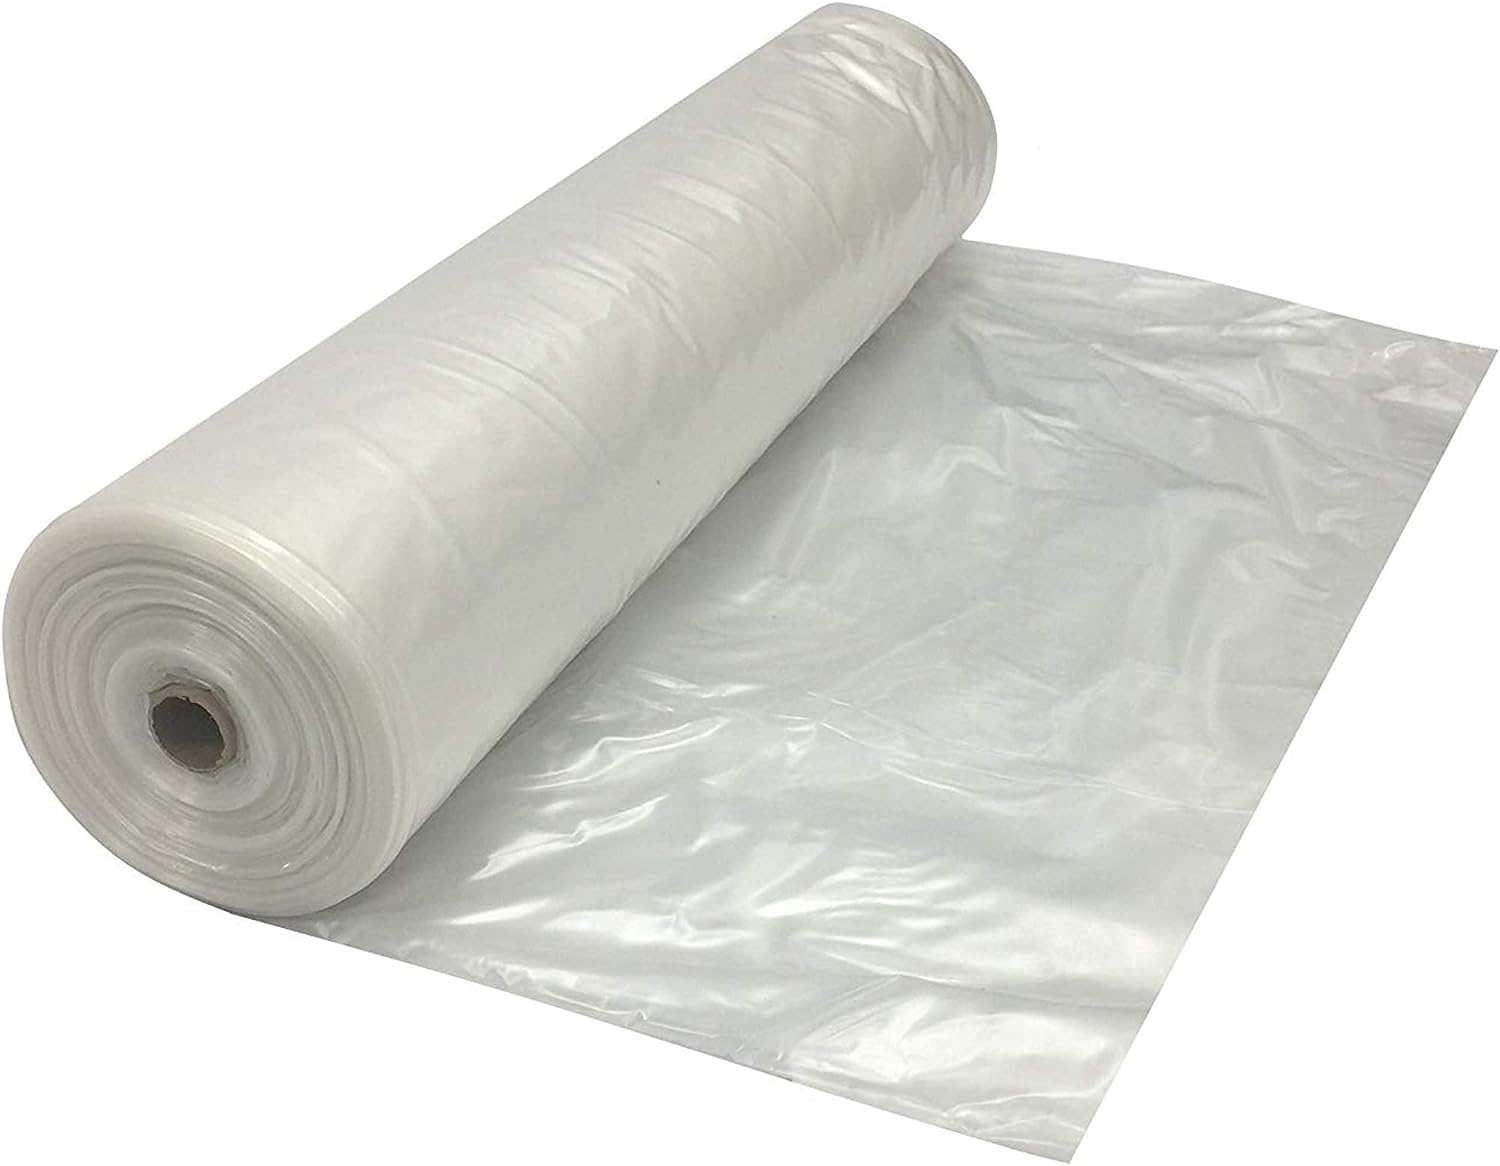 Poly Sheeting, 10 mil, 20' x 100' Clear